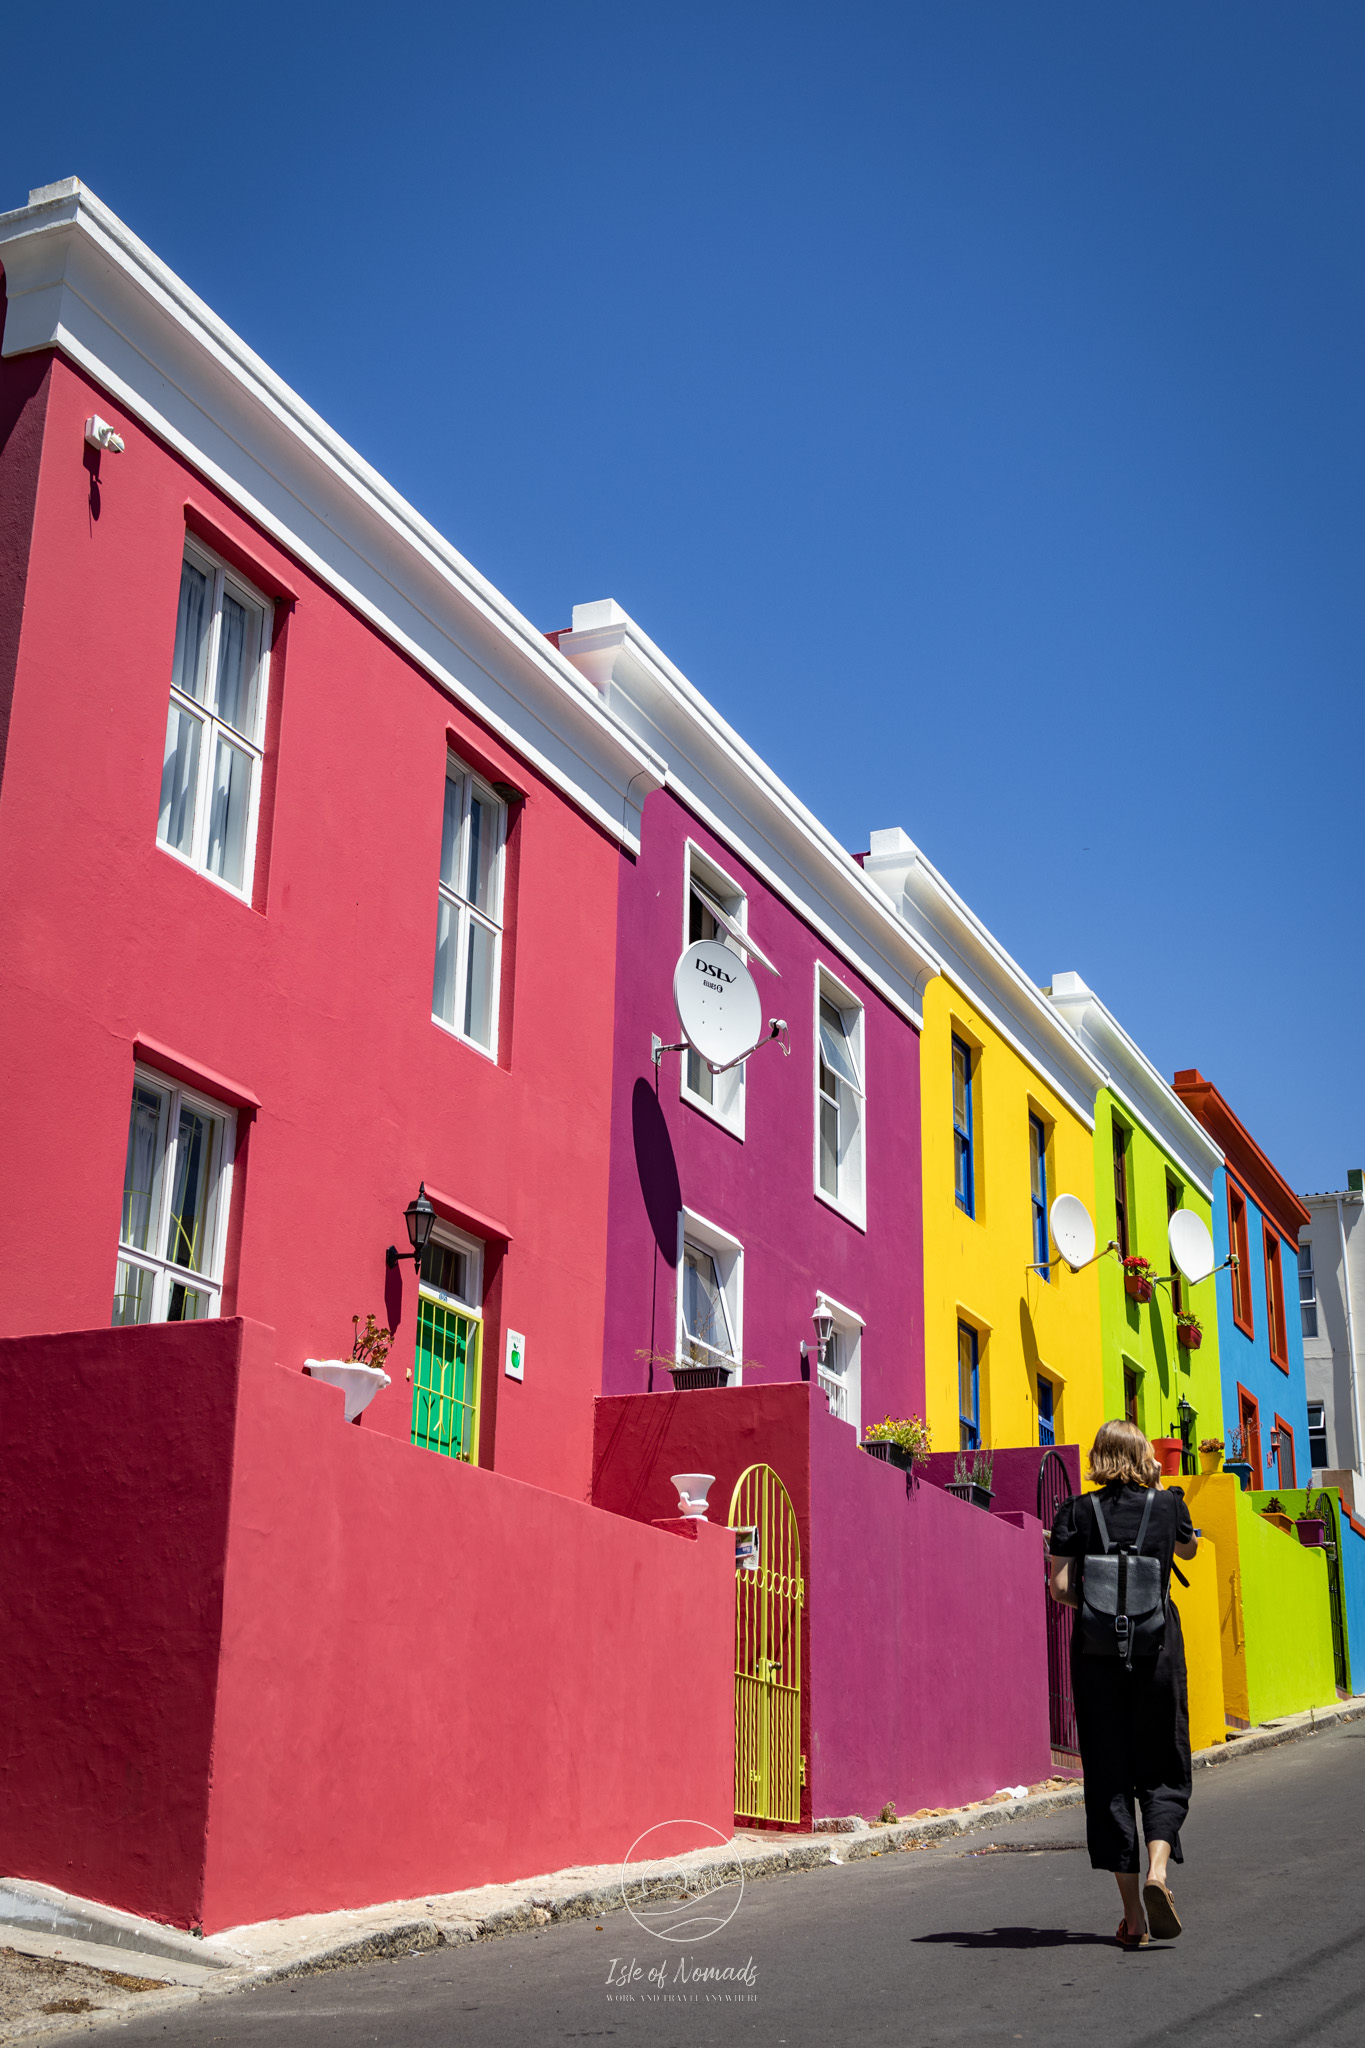 The colorful houses of Bo Kaap are a great picture backdrop...